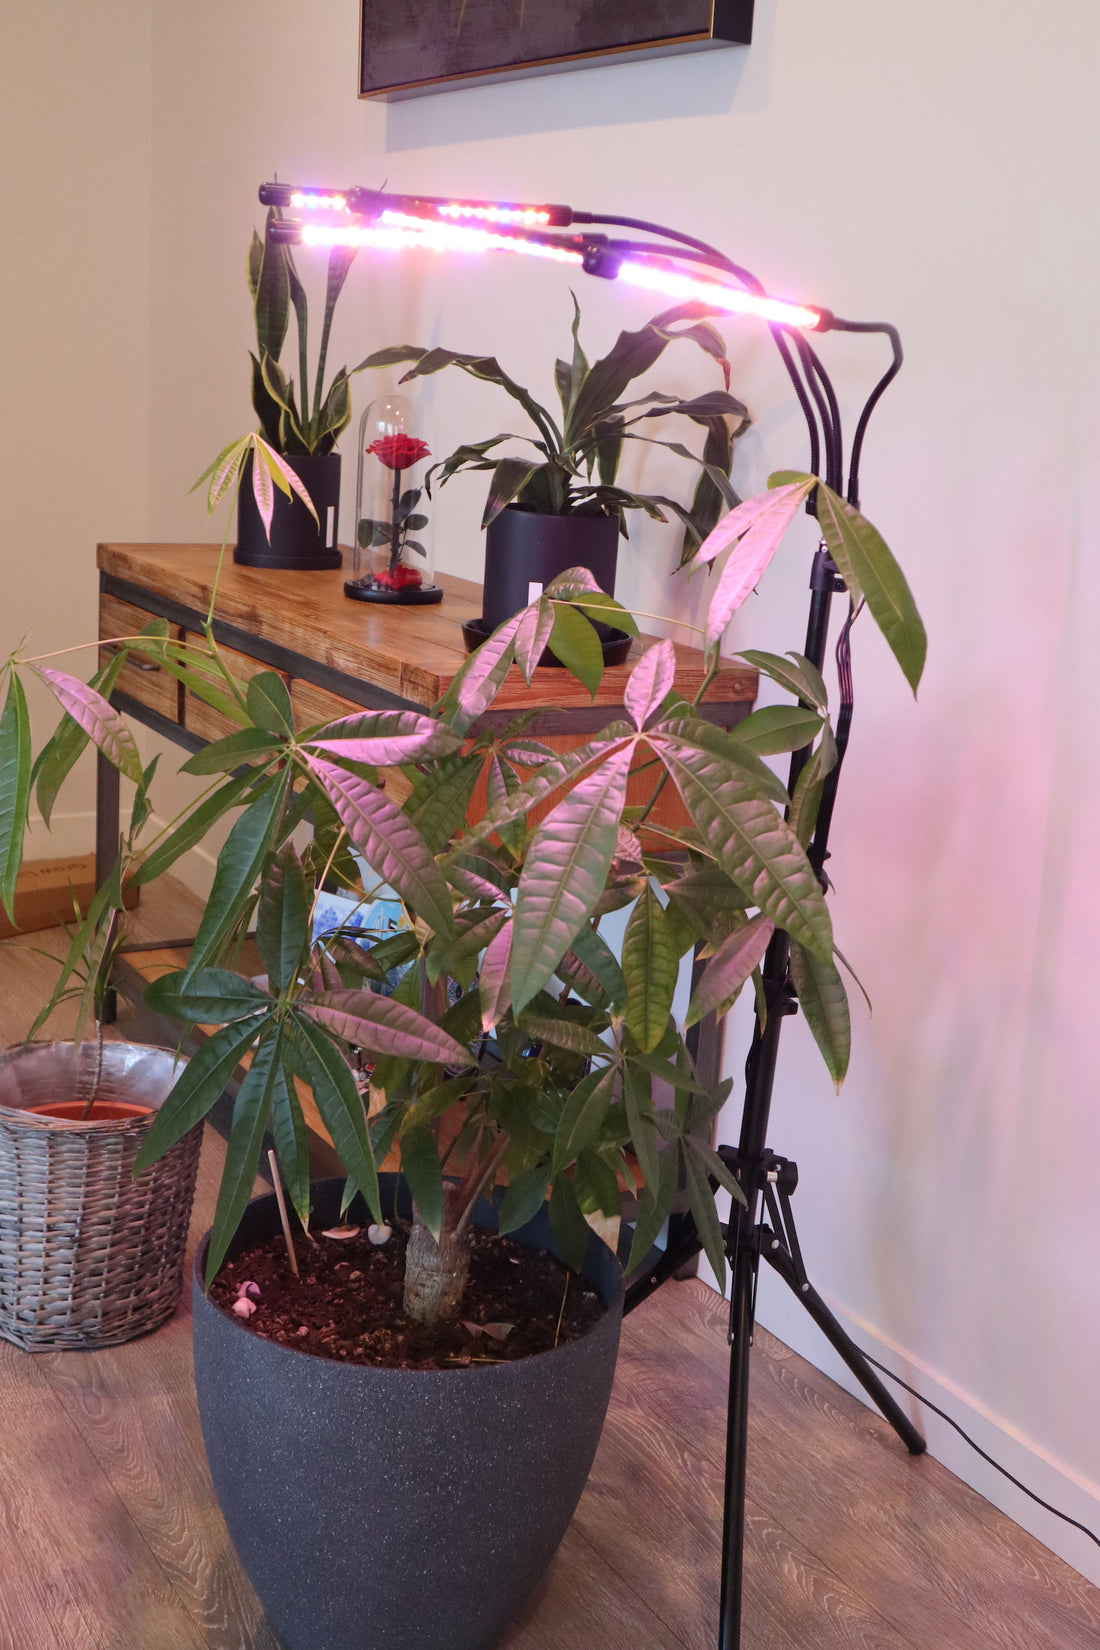 How Do You Know if Your Indoor Plants Need More Sun Light?